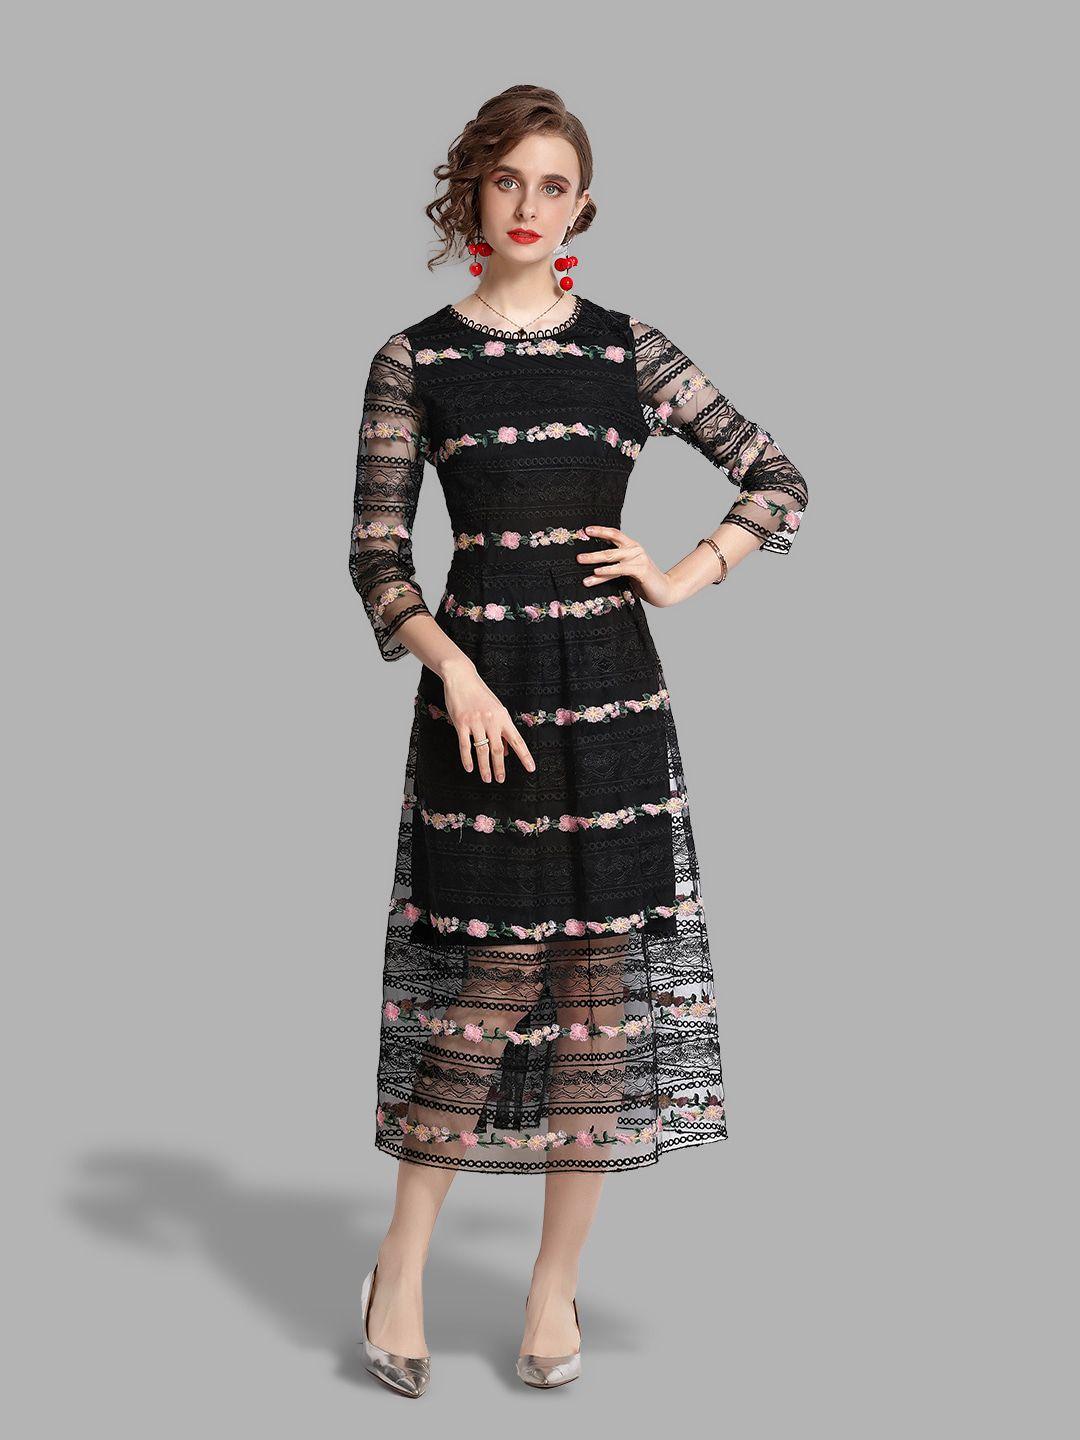 jc collection women black floral embroidered net a-line midi dress